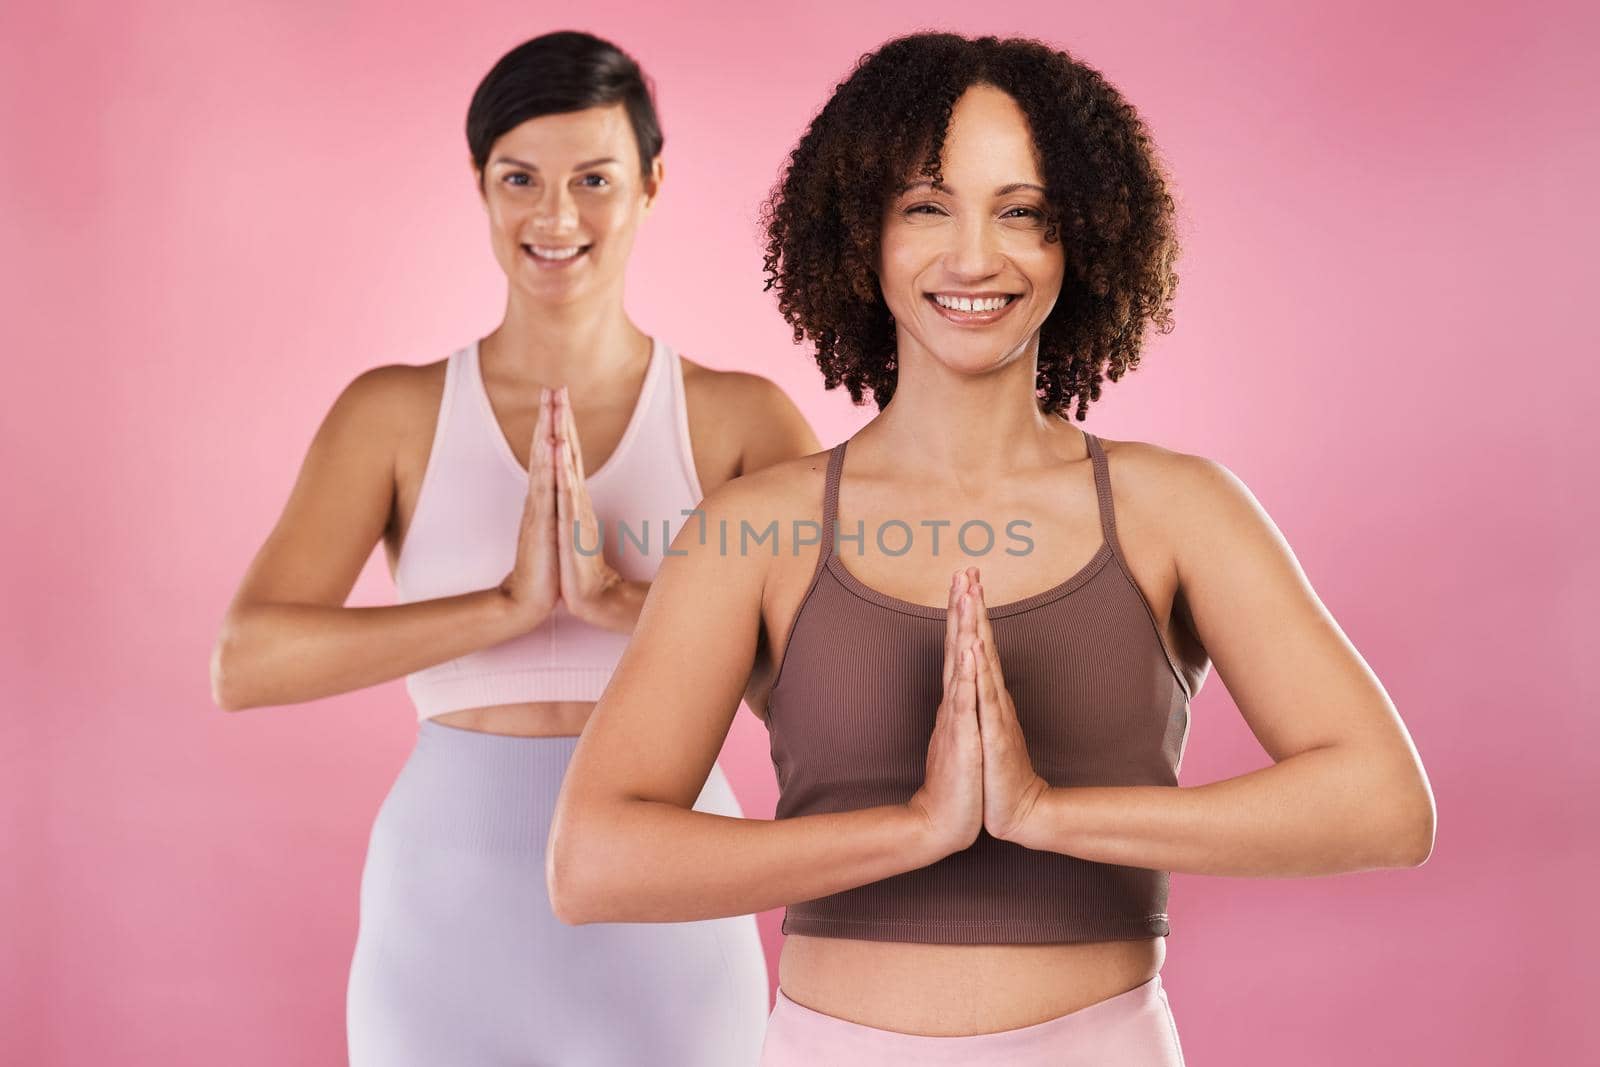 Cropped portrait of two attractive young female athletes meditating in studio against a pink background.